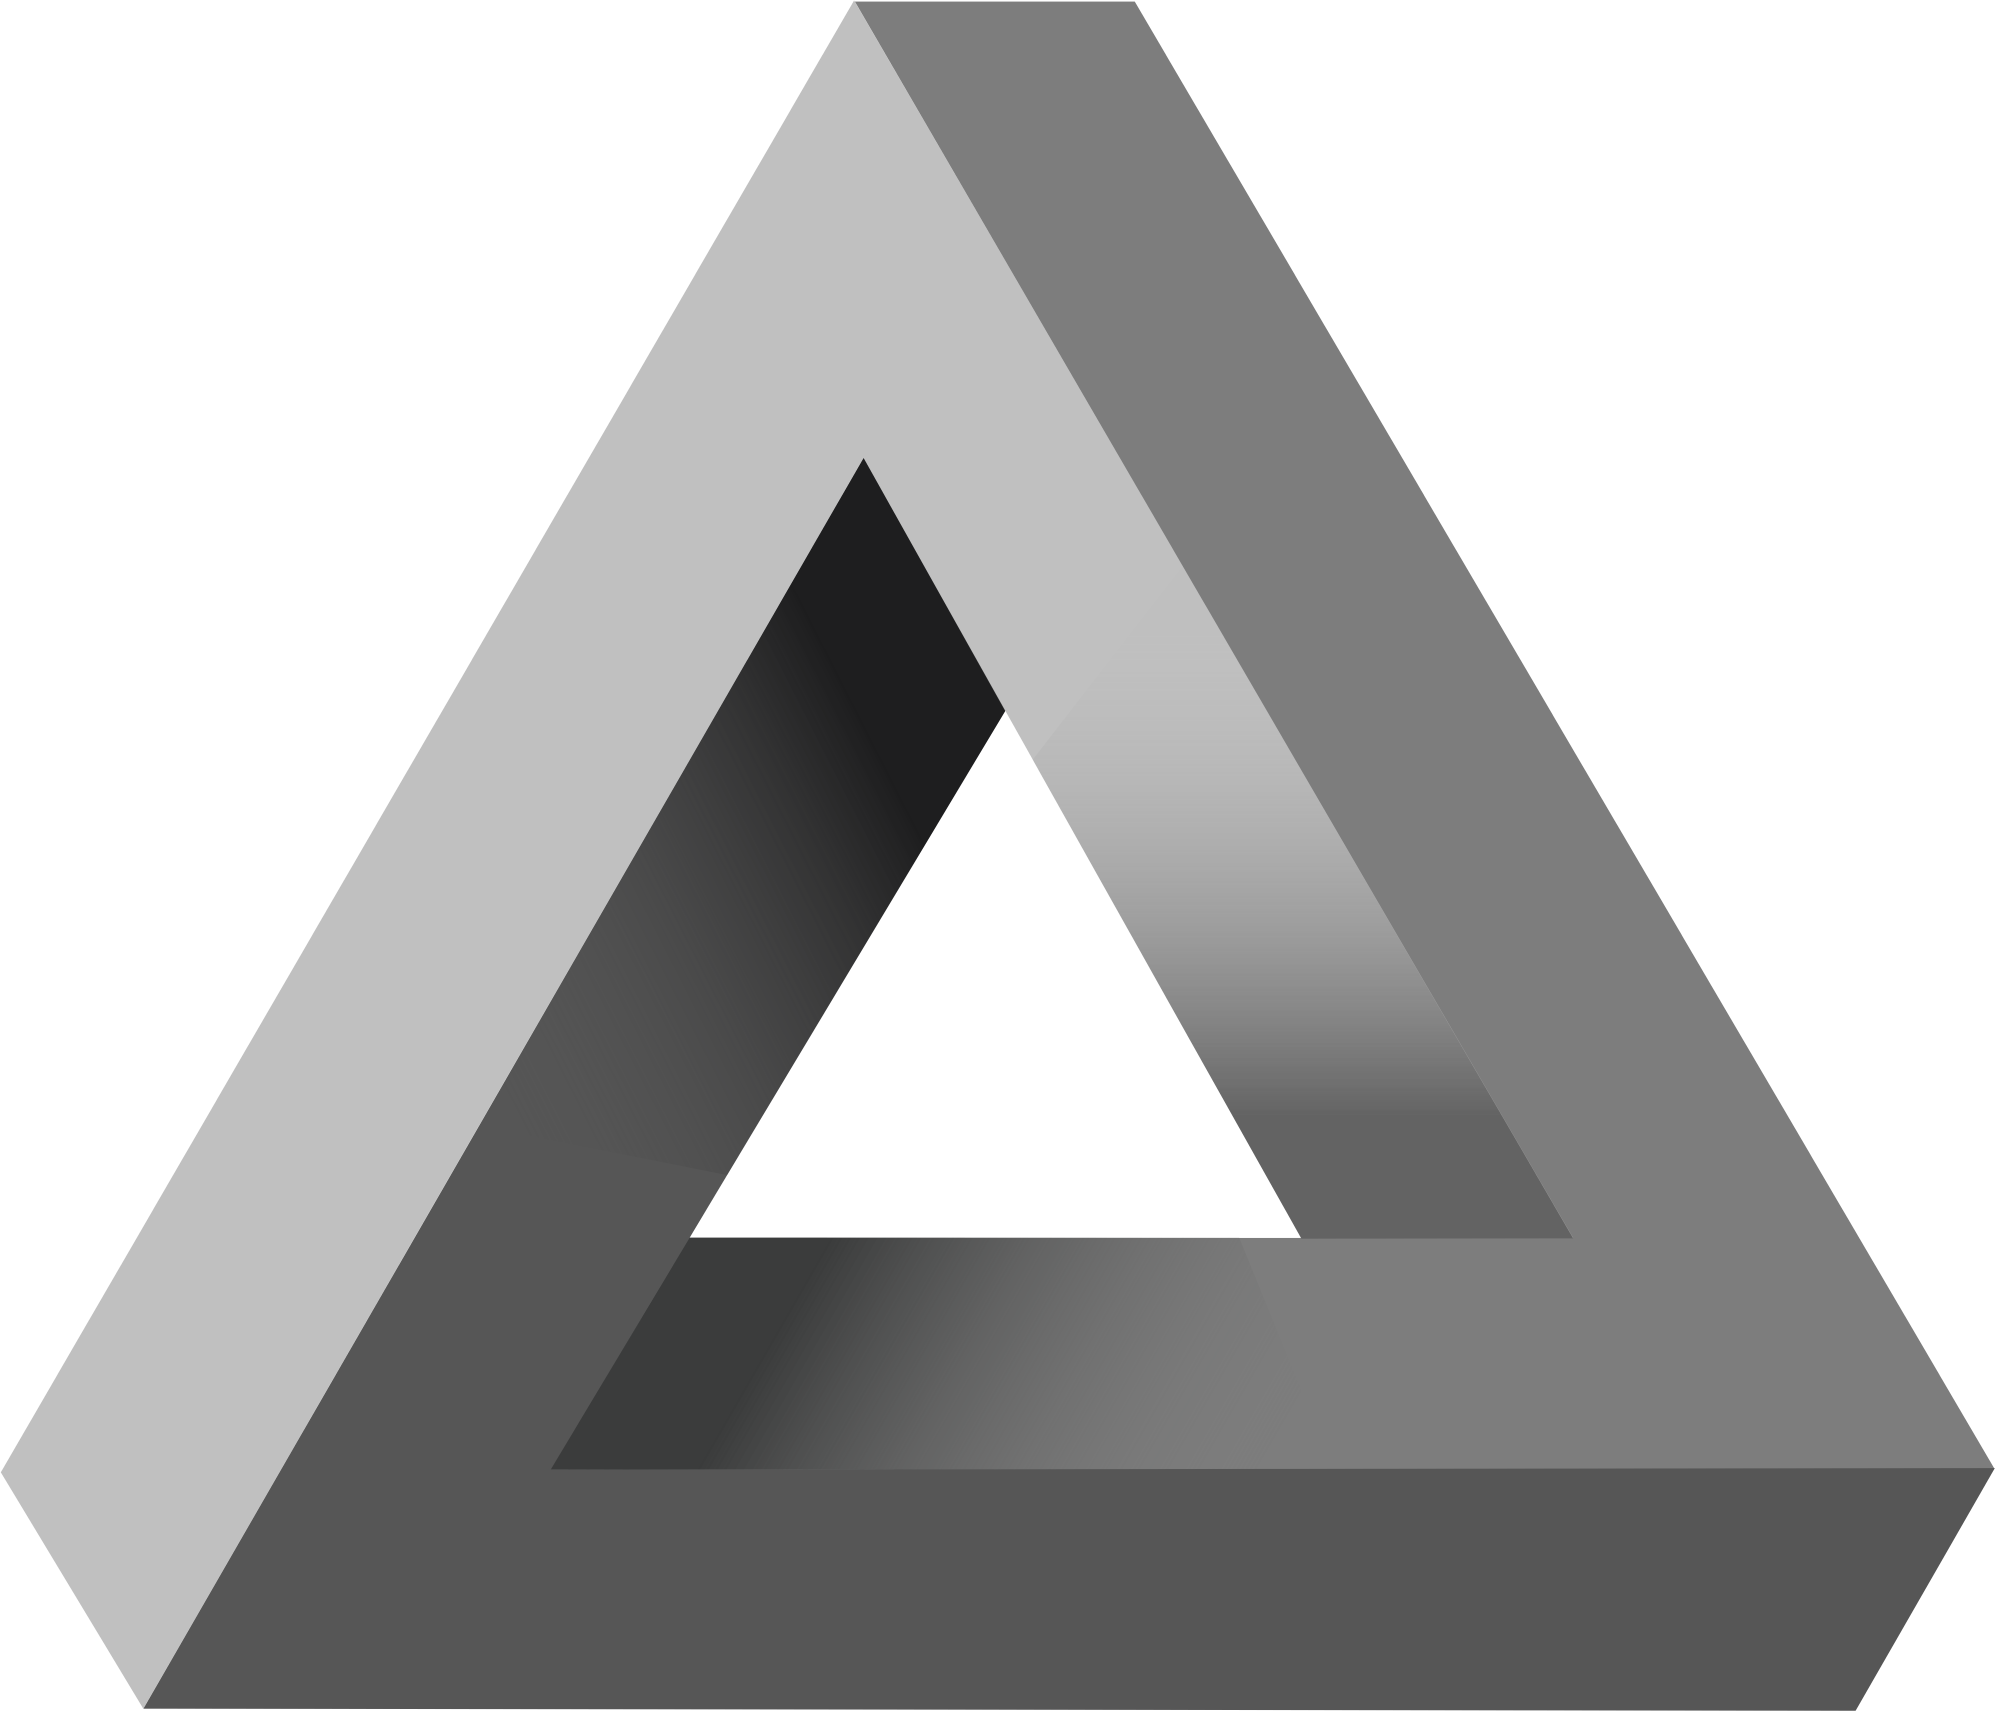 Penrose Triangle by Assassicactus on DeviantArt